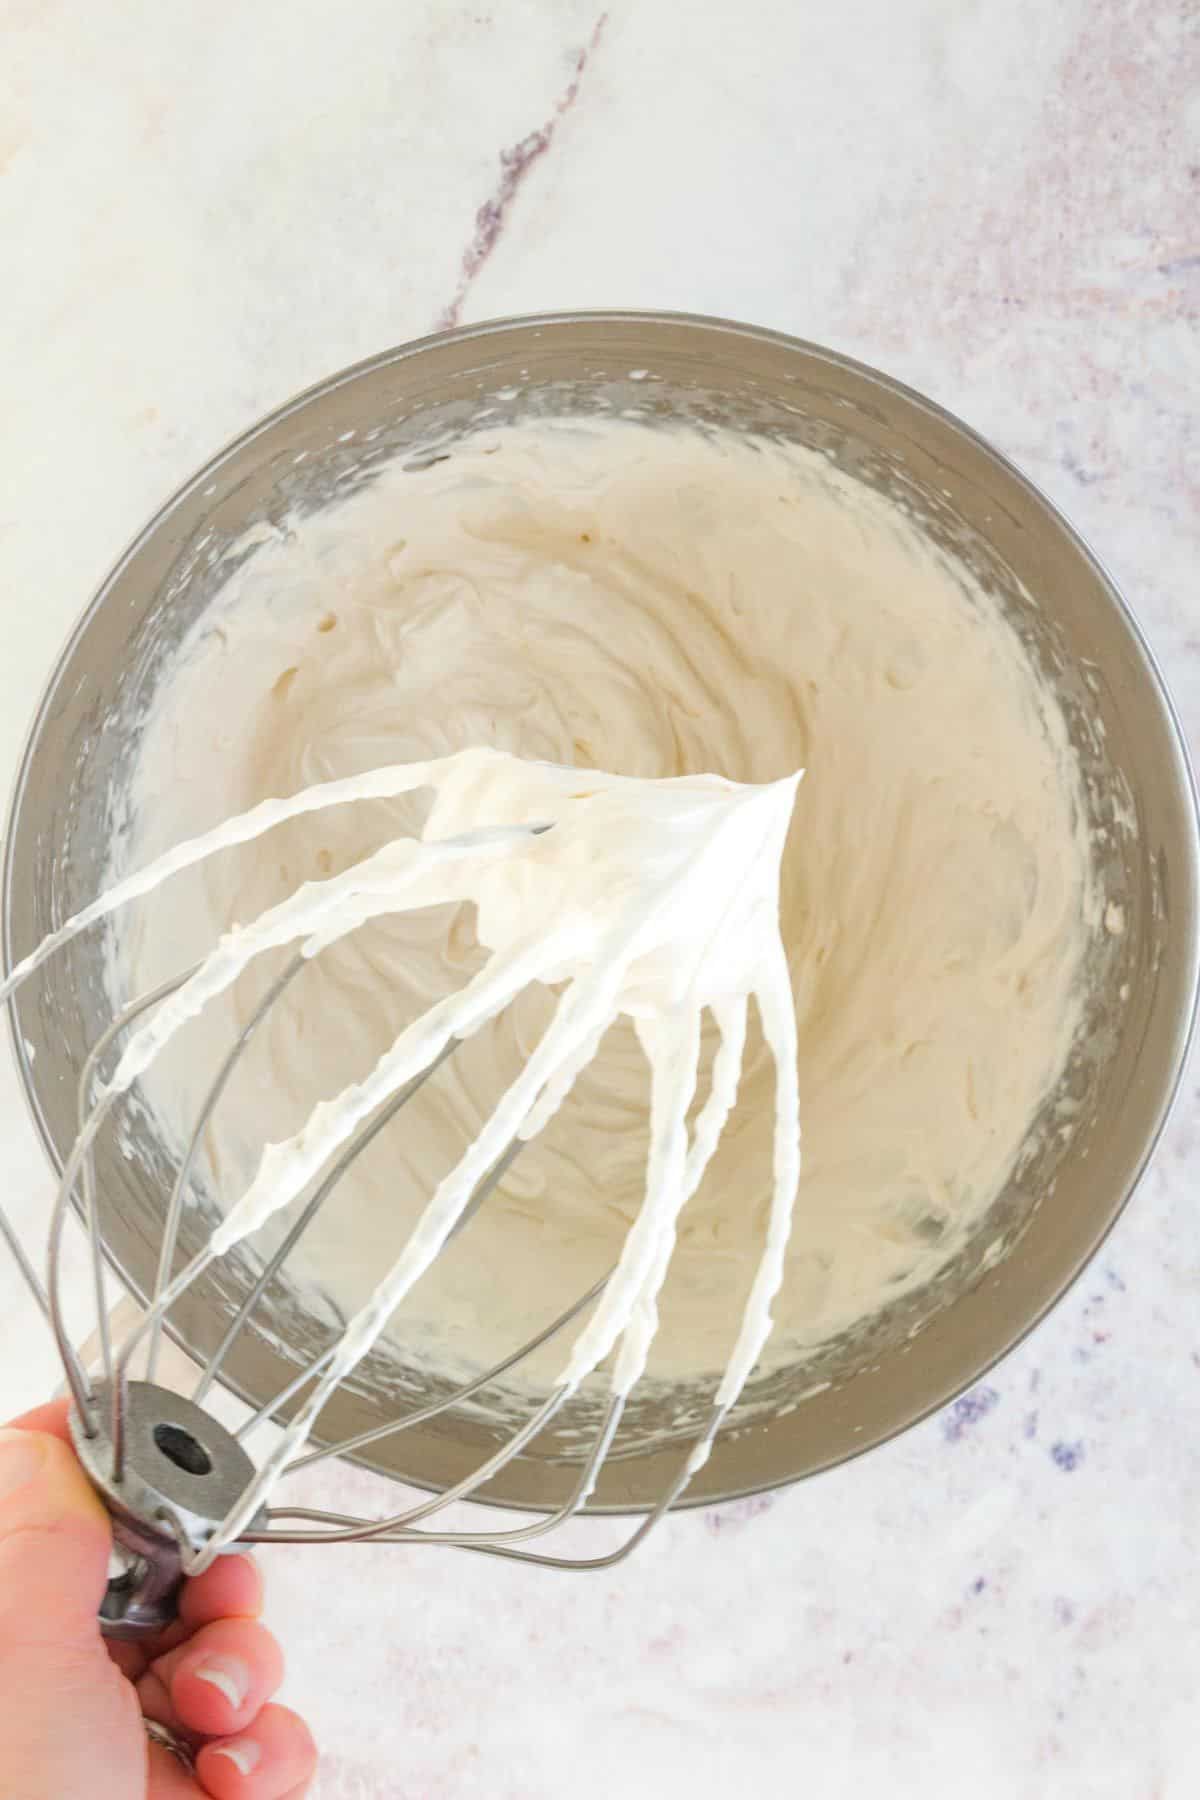 The finished whipped cream frosting showing stiff peaks